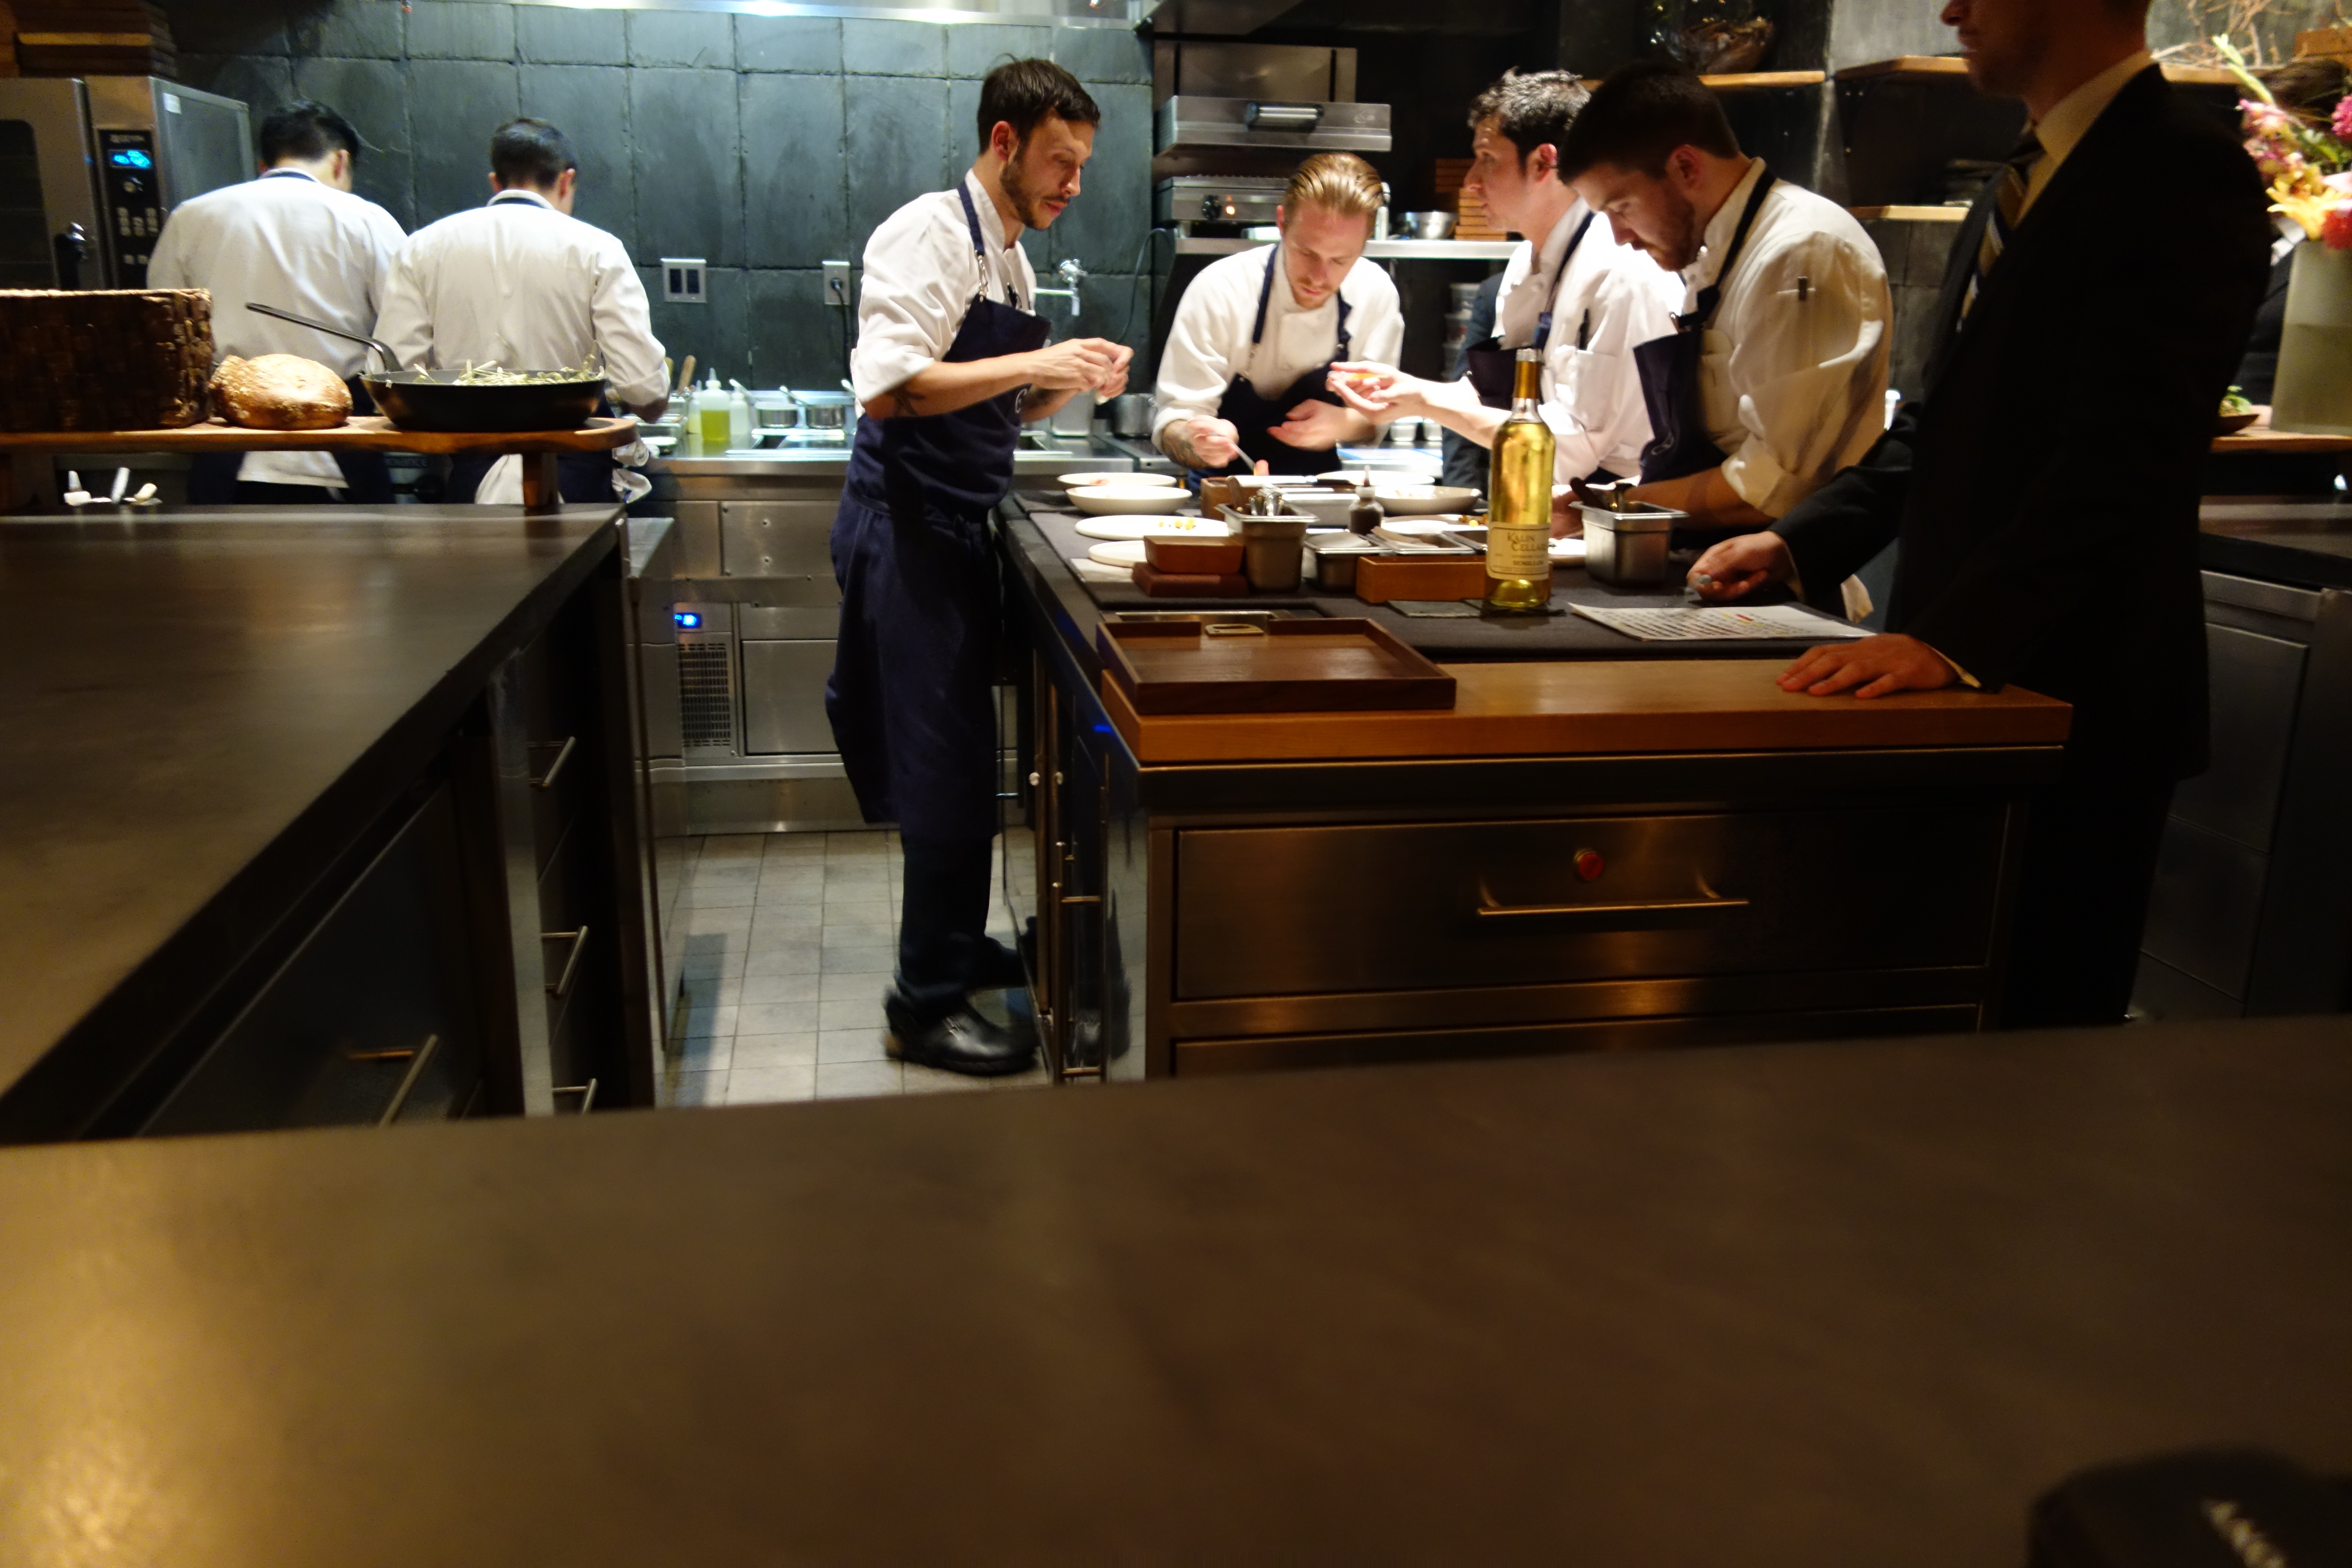 atera | New York | Sep ’13 | “aesthete’s table” | Kenneth Tiong eats